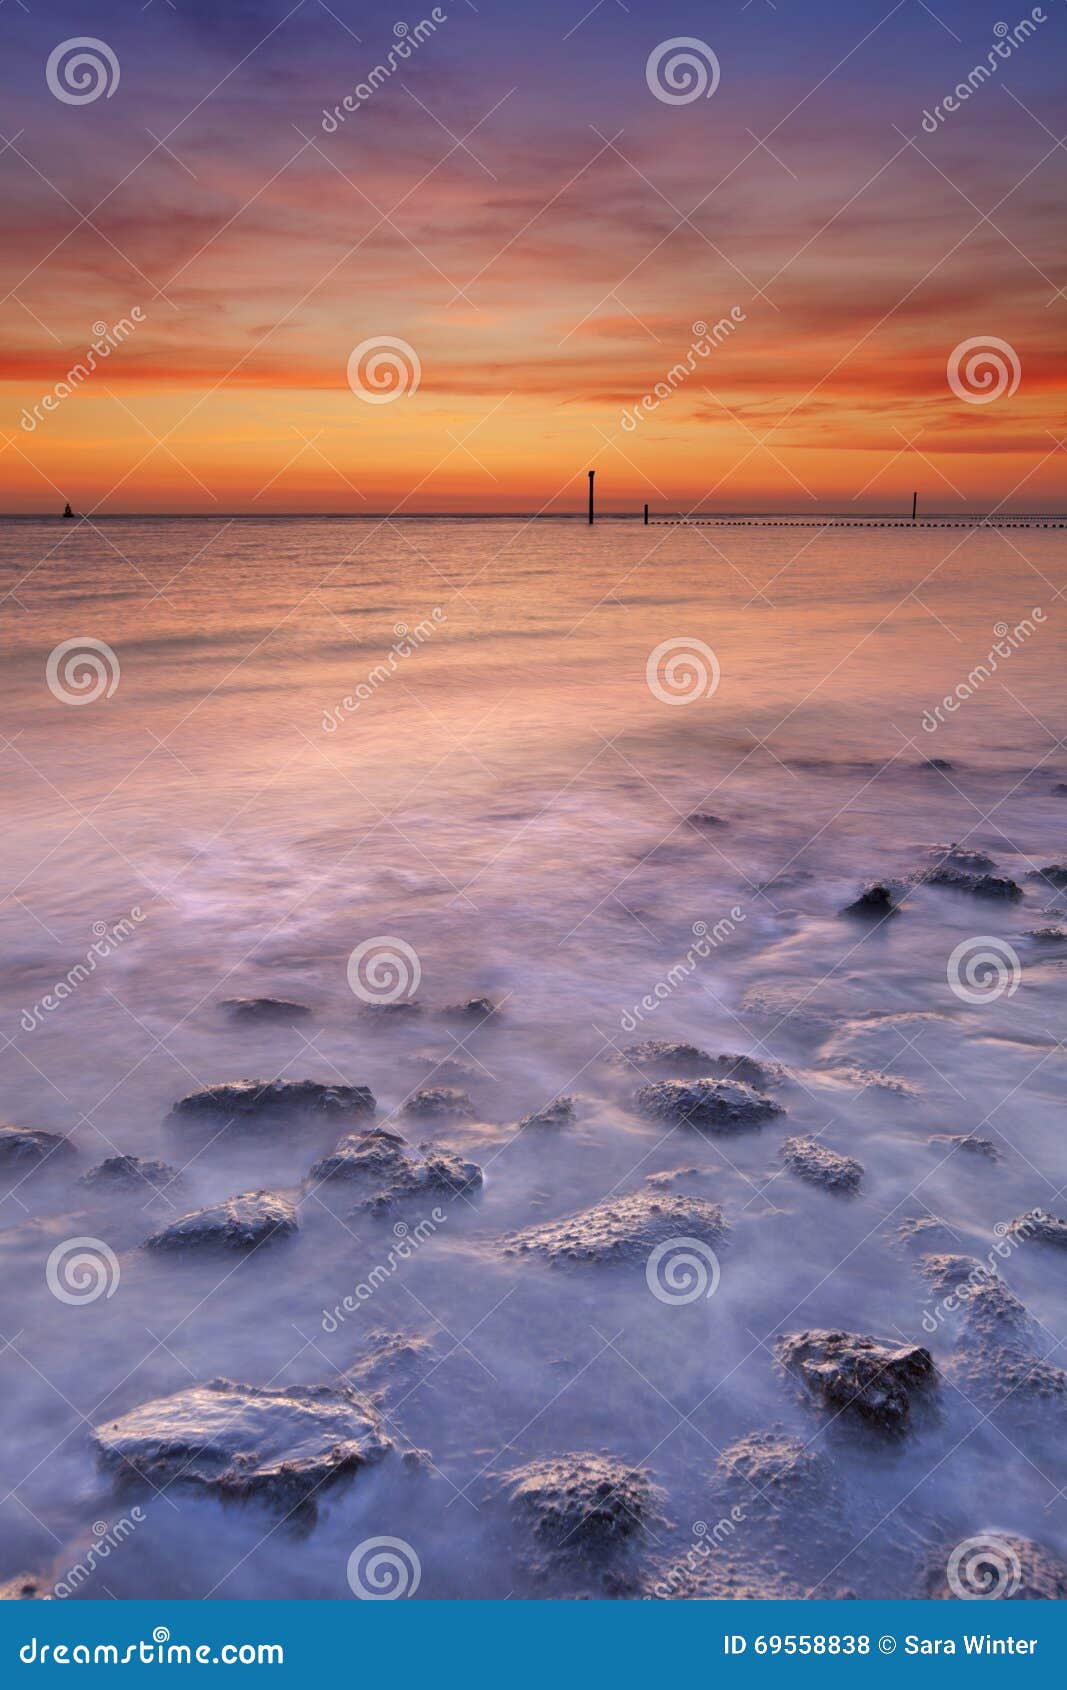 beach with rocks at sunset in zeeland, the netherlands